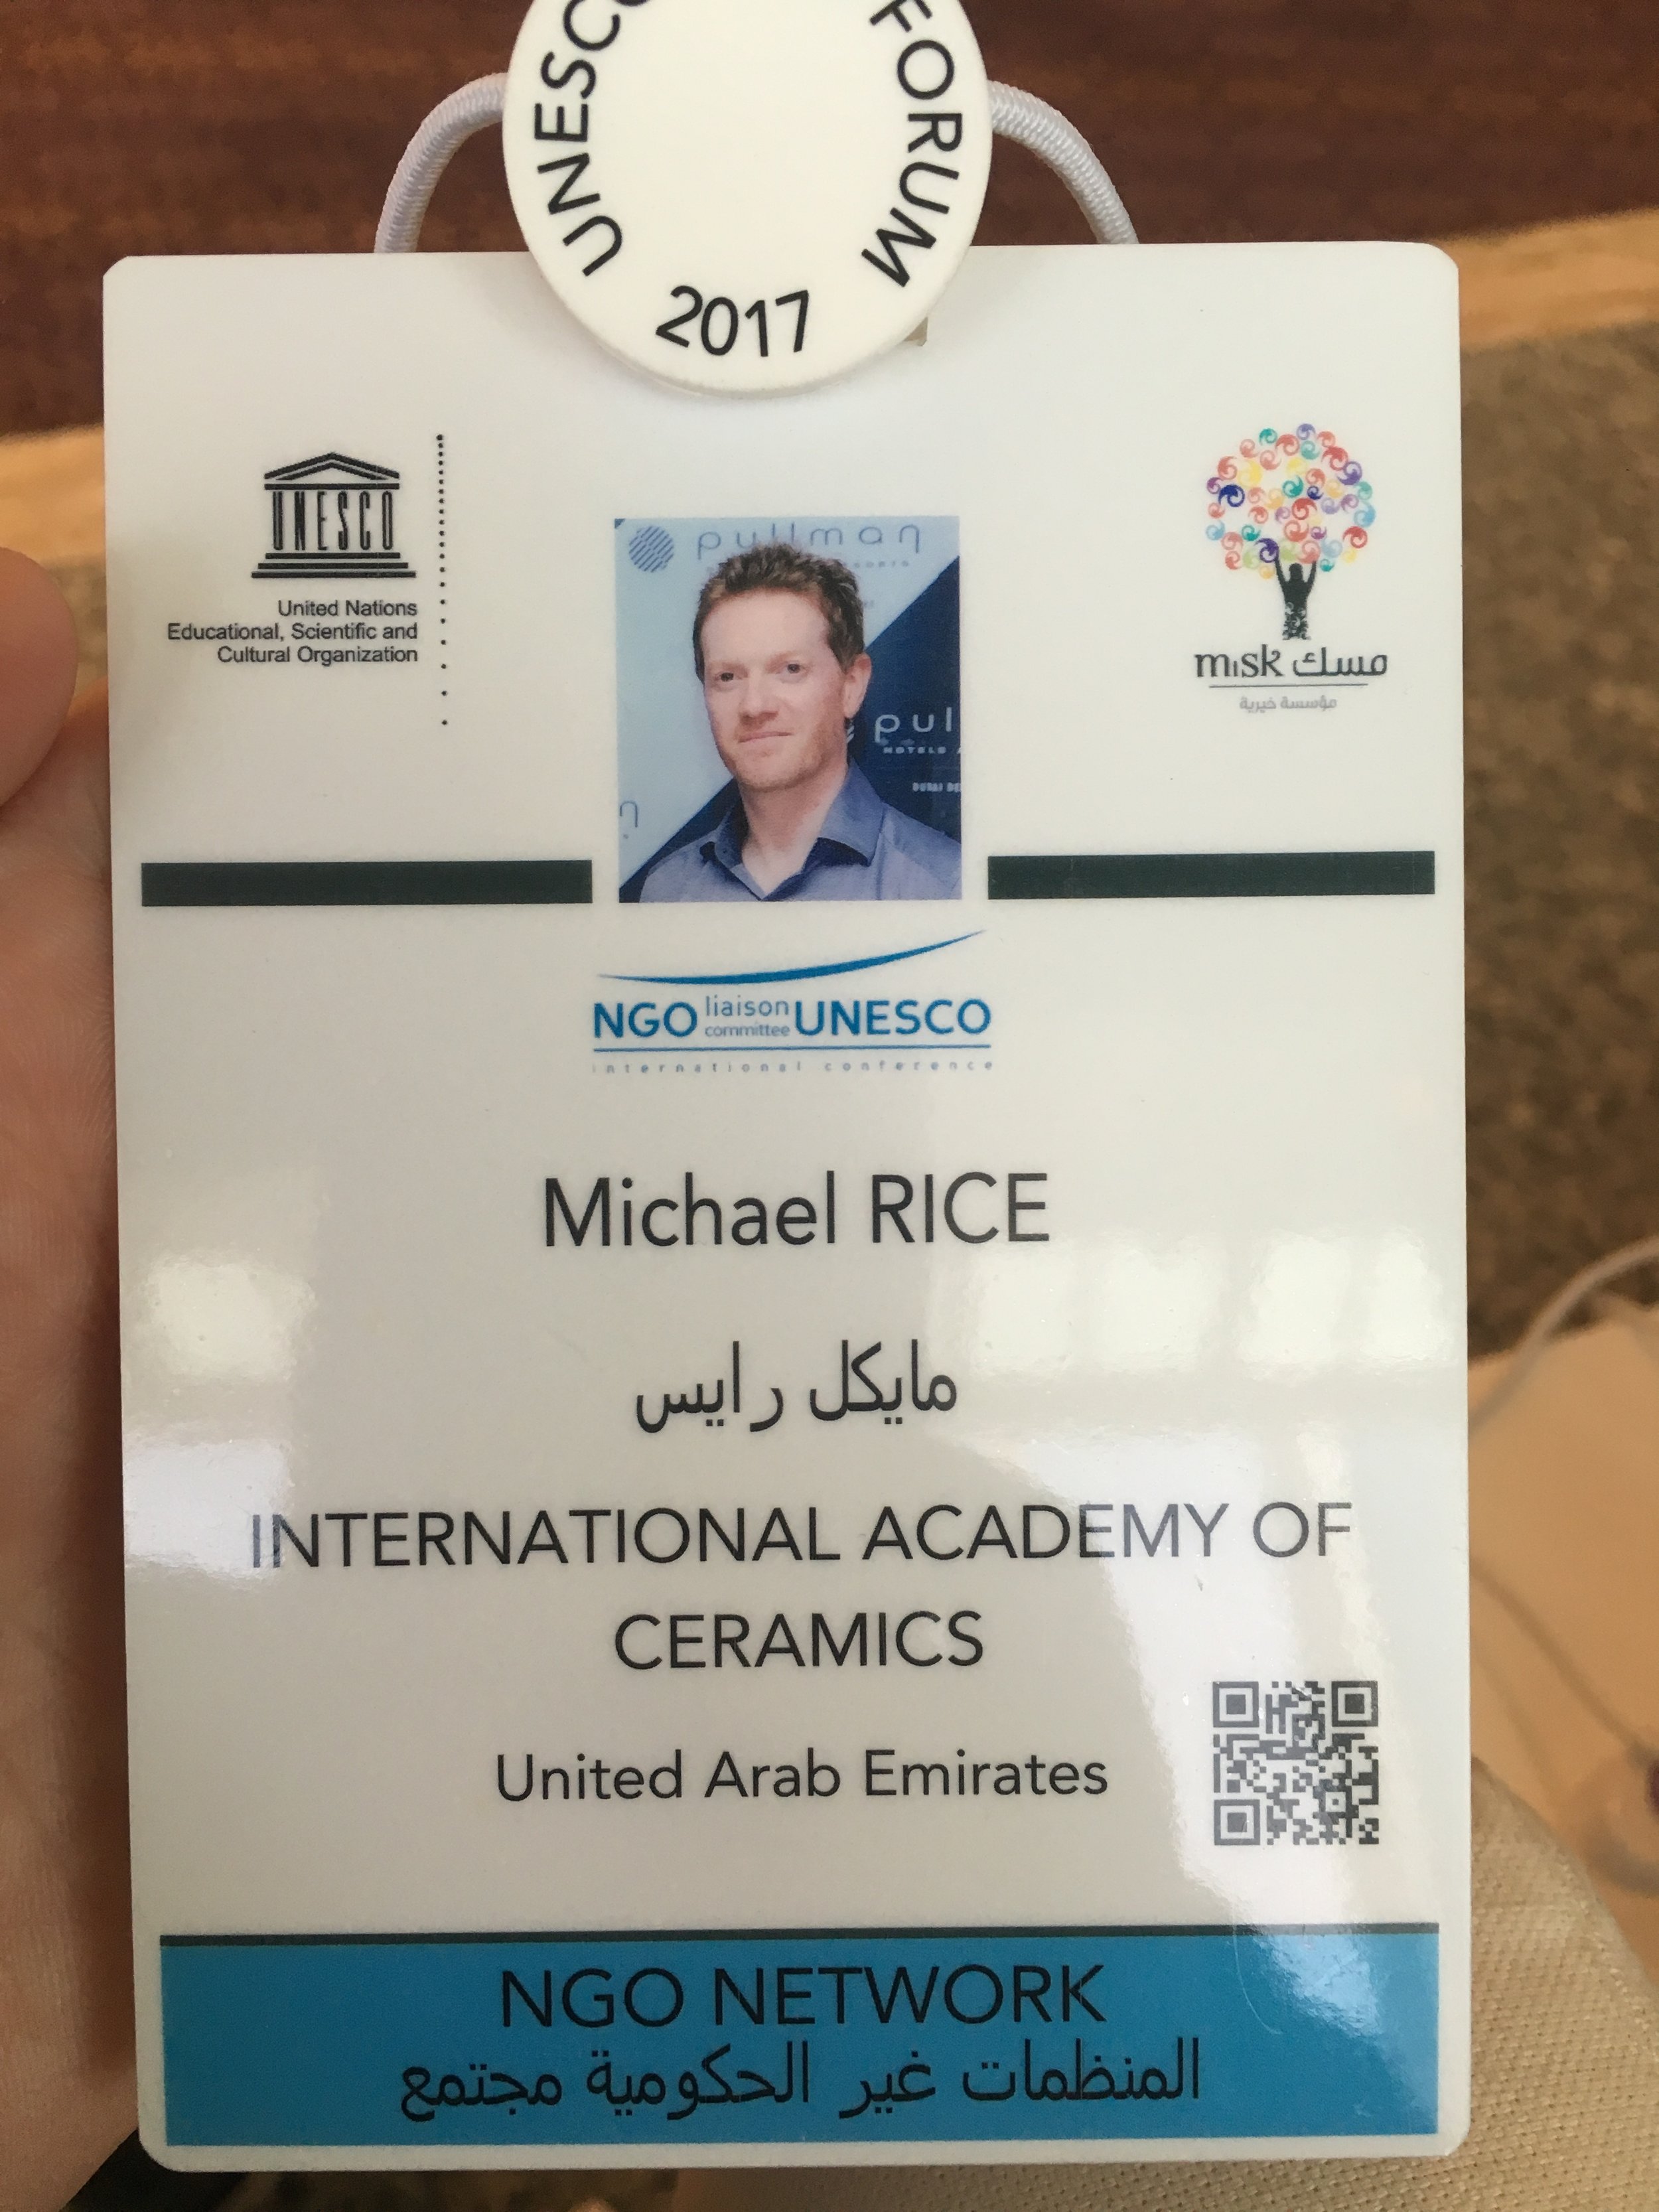  Attended the first NGO Forum in Saudi Arabia as representative of the International Academy of Ceramics in May 2017 